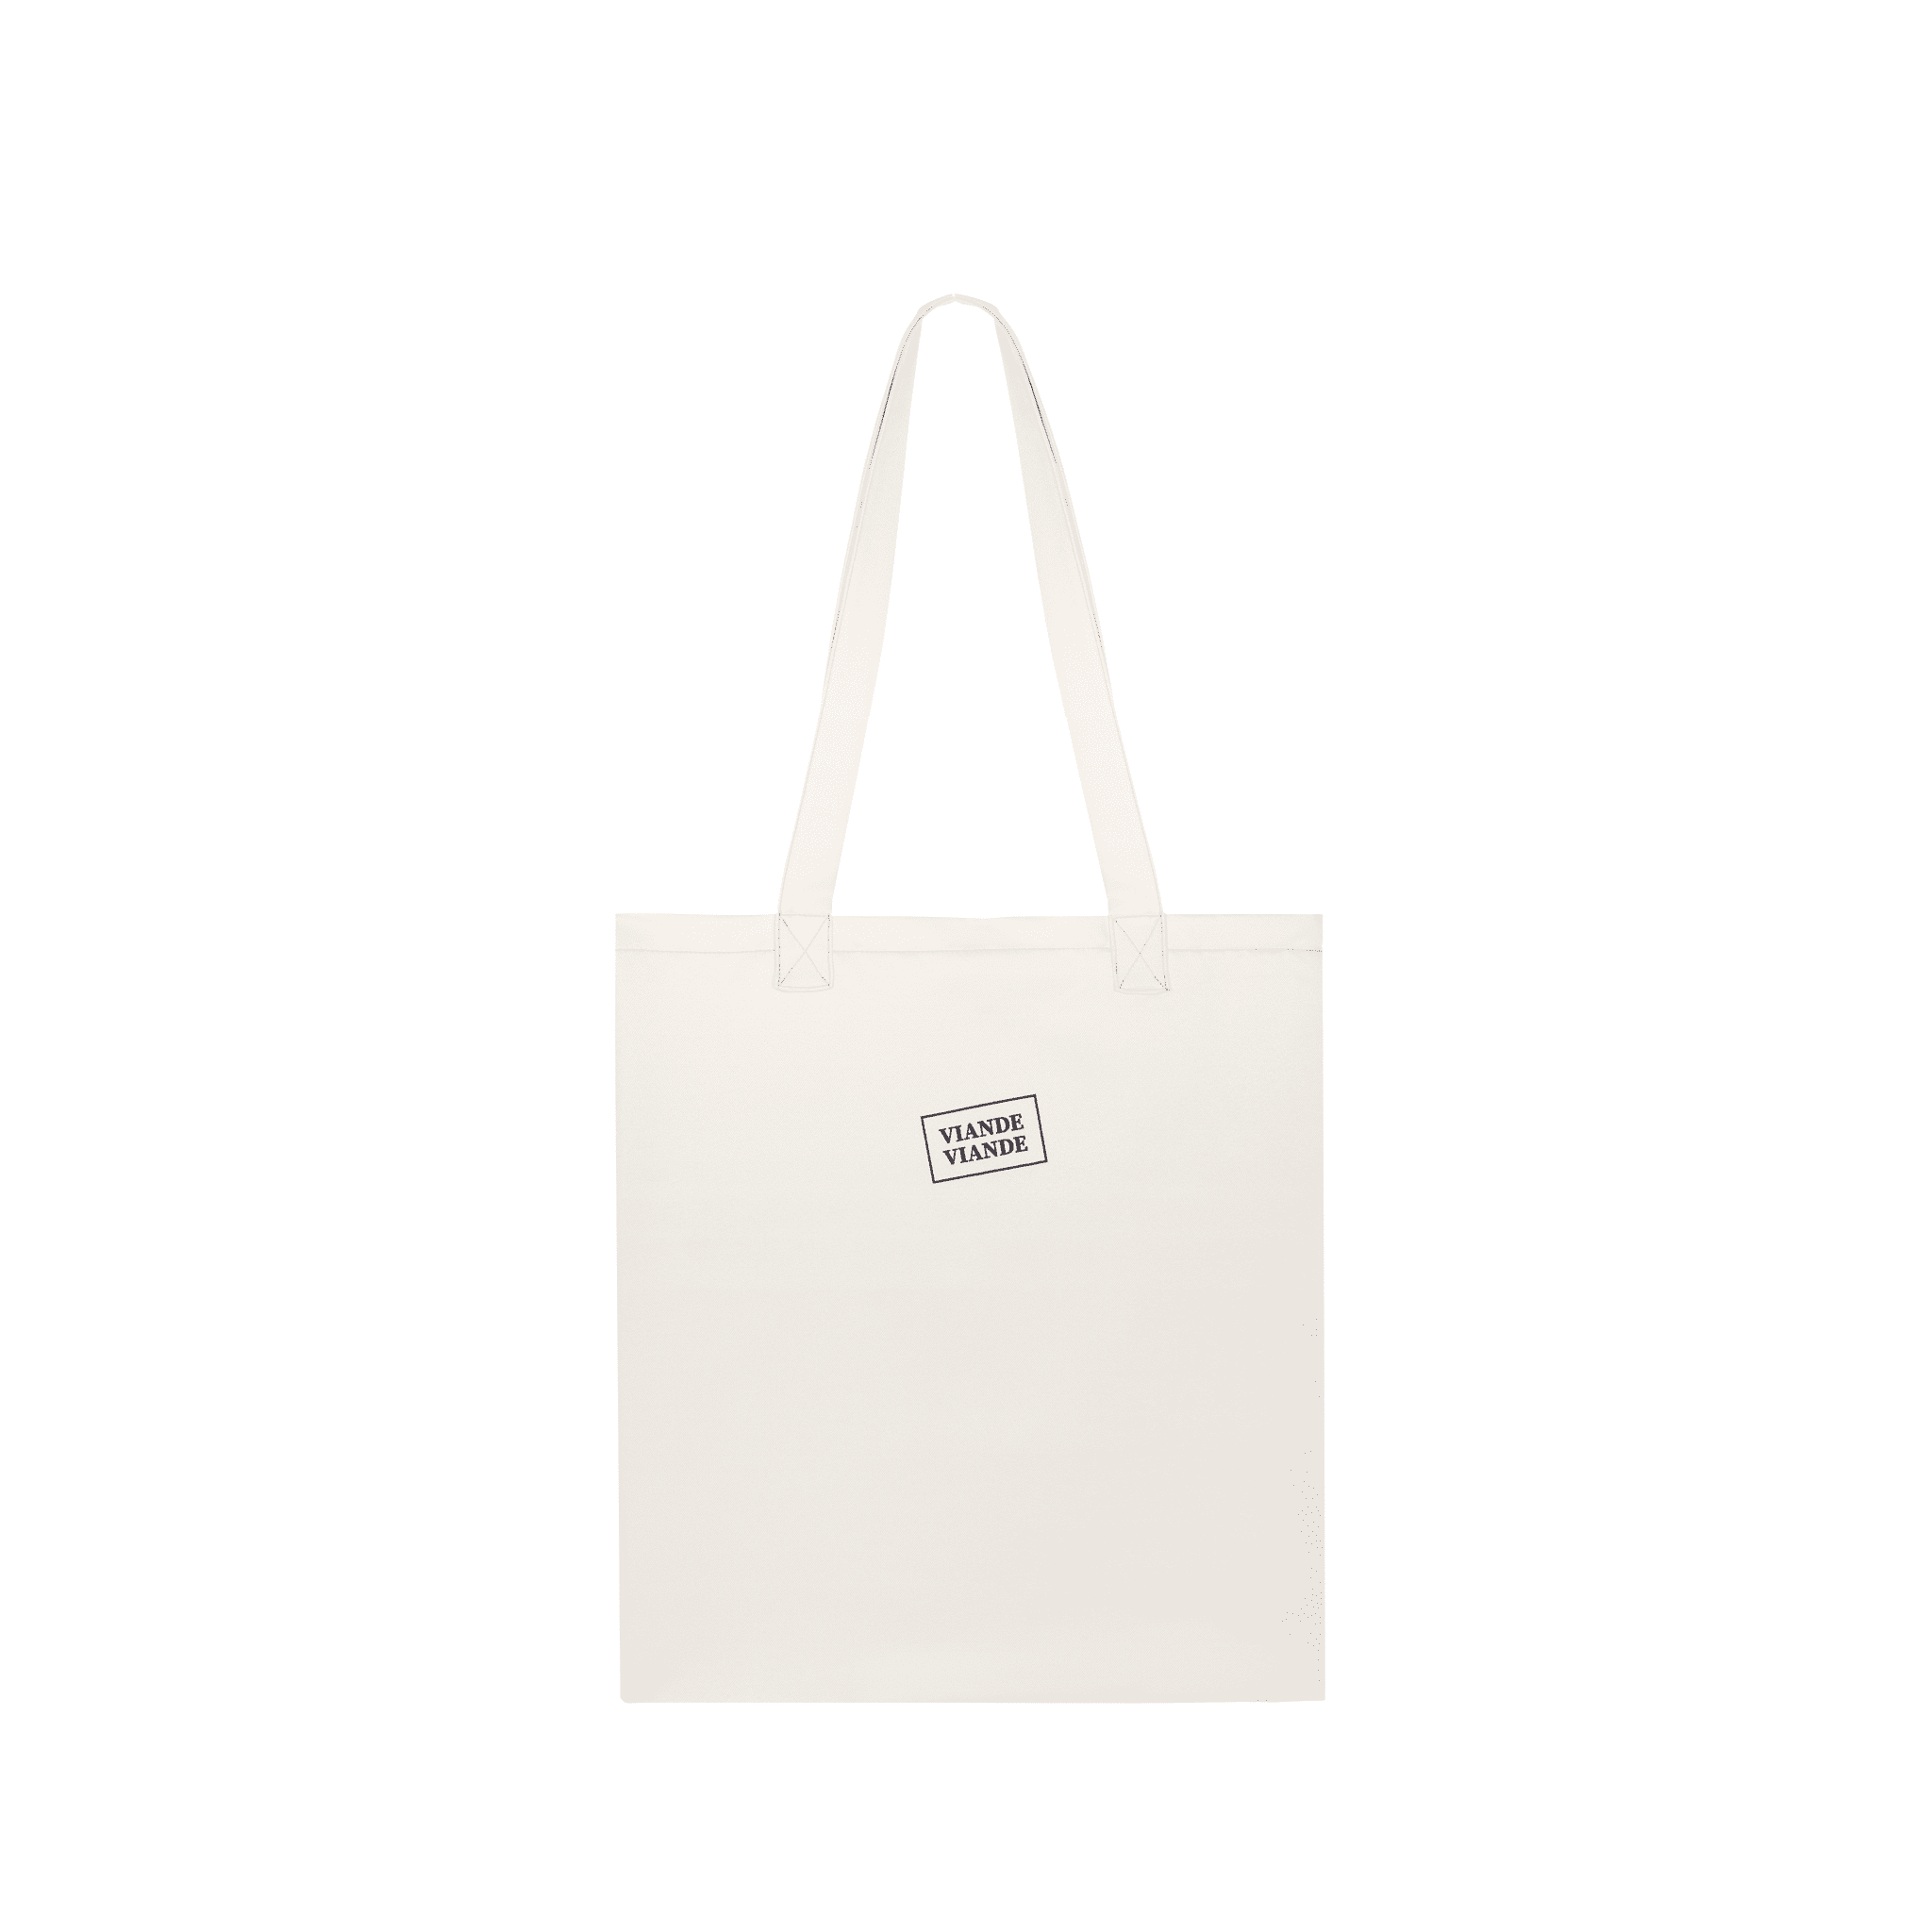 Tote bag made in Europe